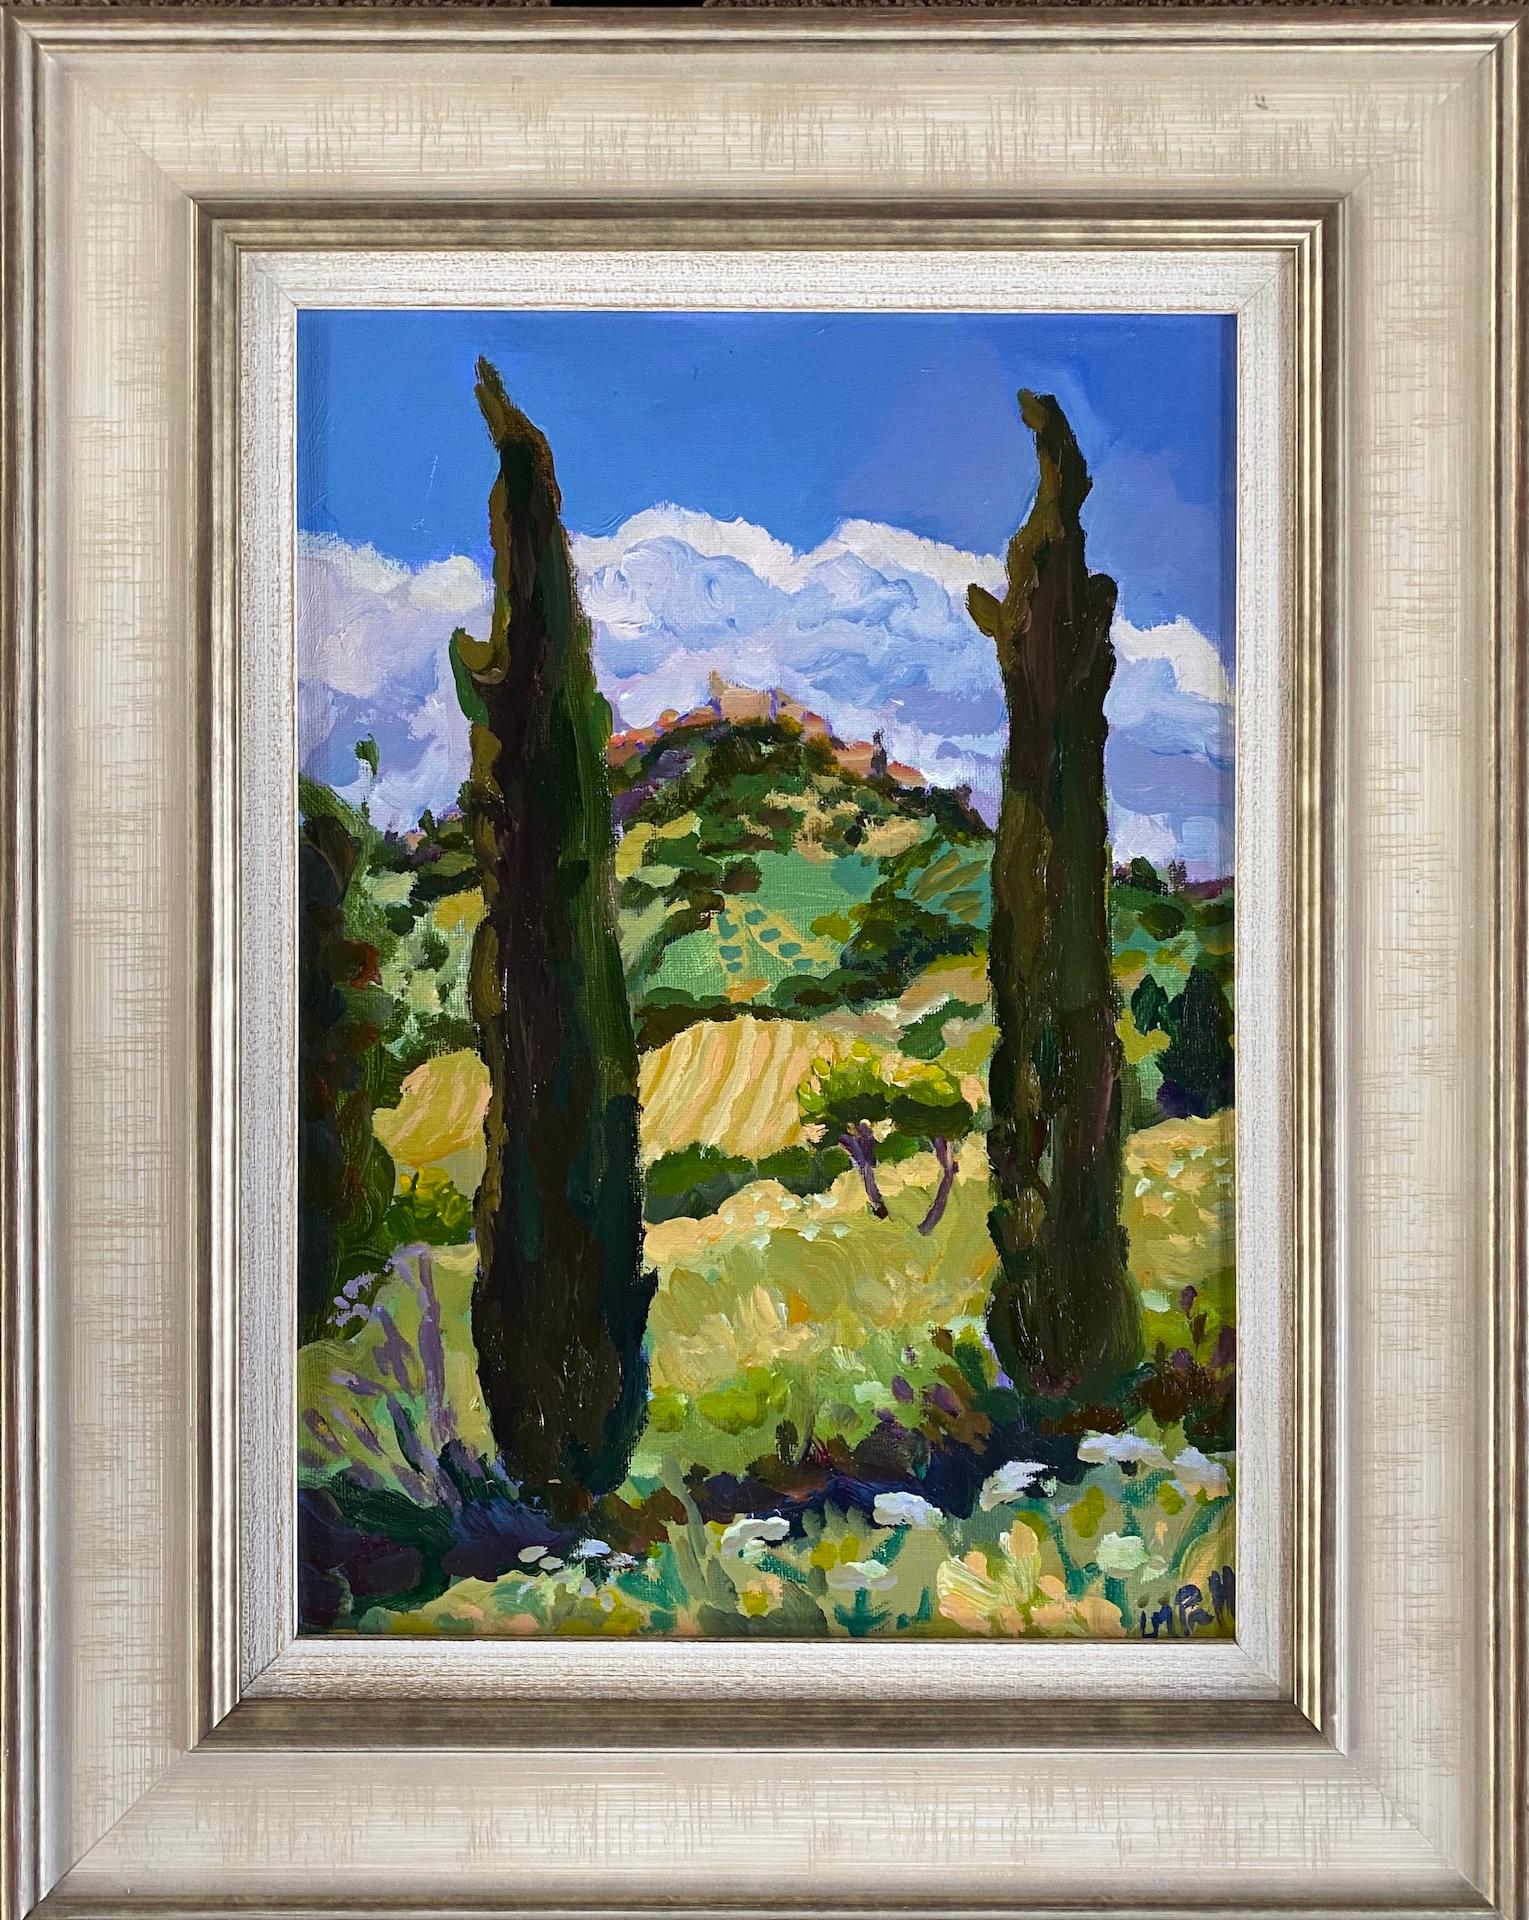 Lucy Pratt
Casole D’elsa III
Original Landscape Painting
Oil on Board
Board size: H 41cm x W 29cm
Framed Size: H 58cm x W 46cm x D 3cm
Sold Framed
(Please note that in situ images are purely an indication of how a piece may look).

Casole D’elsa III